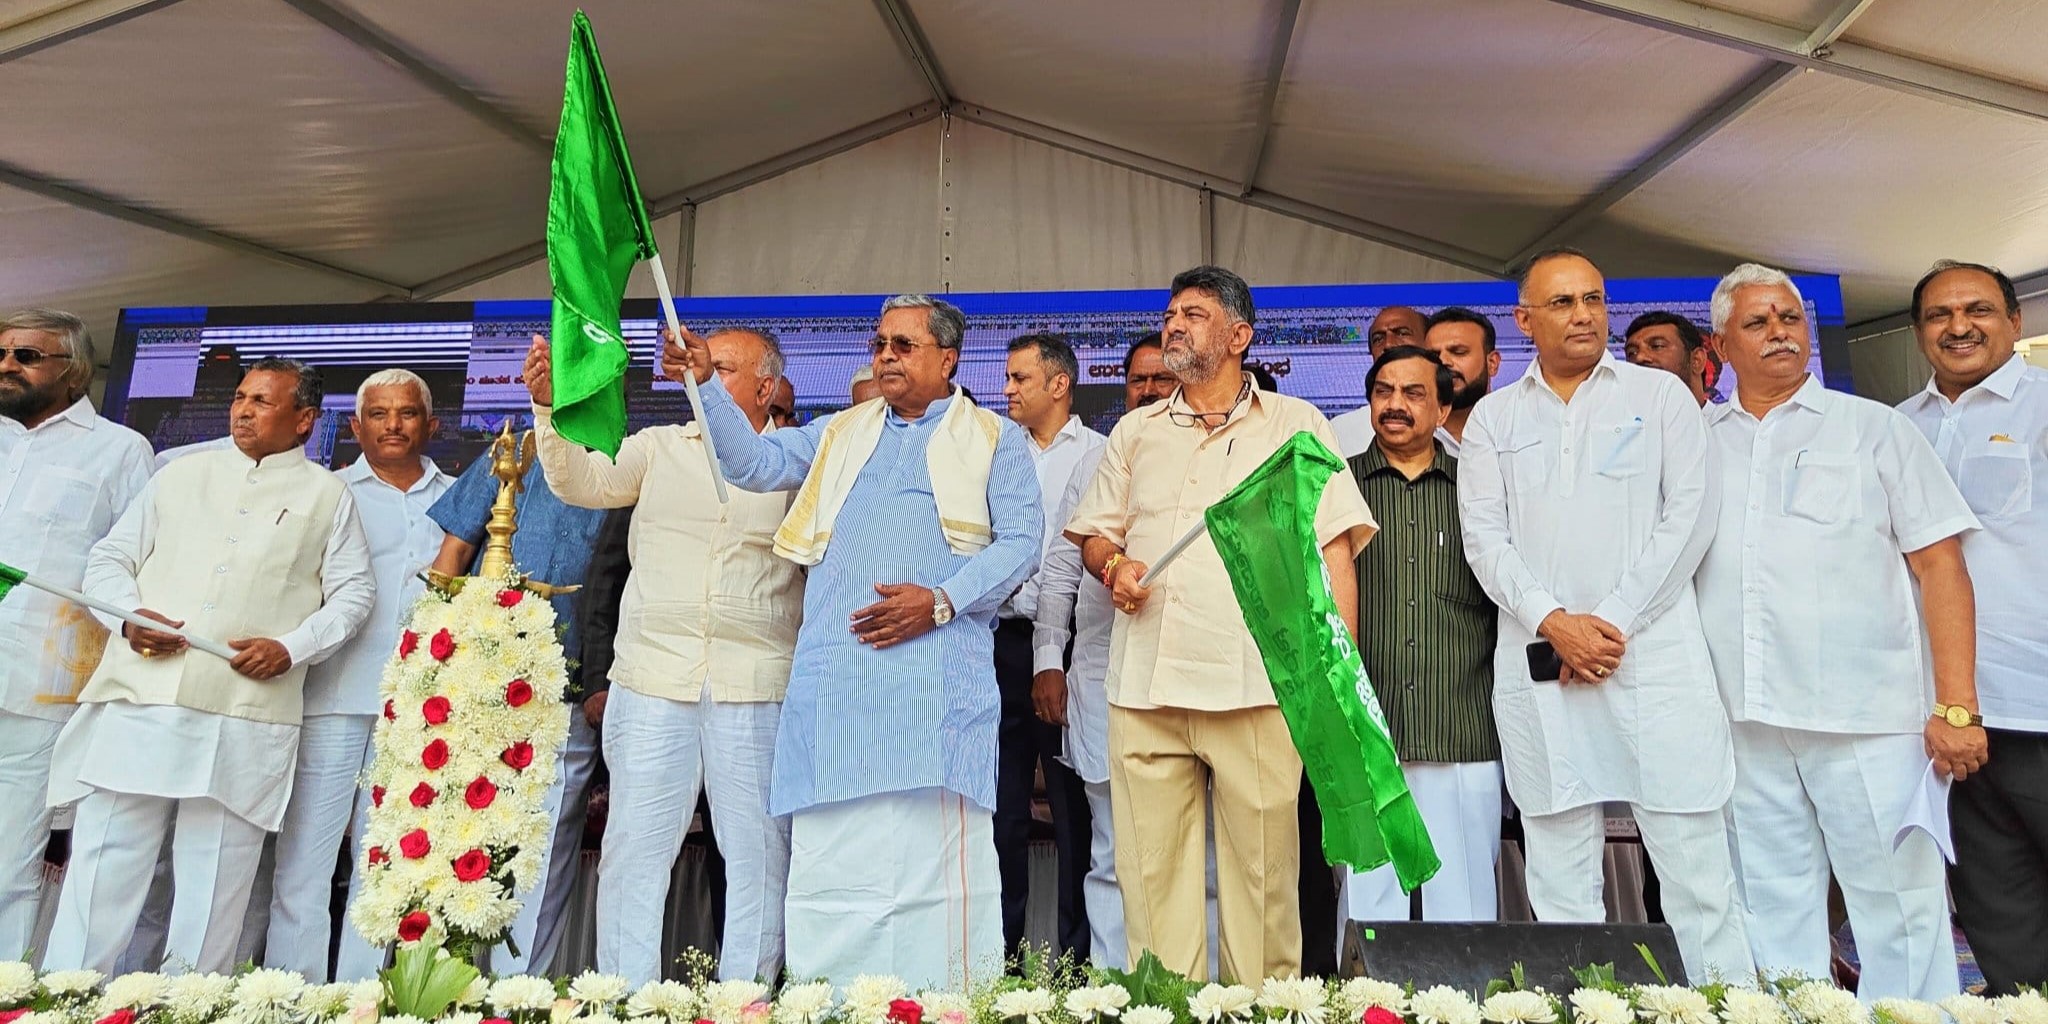 File photo of Chief Minister Siddaramaiah and Deputy Chief Minister DK Shivakumar, both holding green flags.